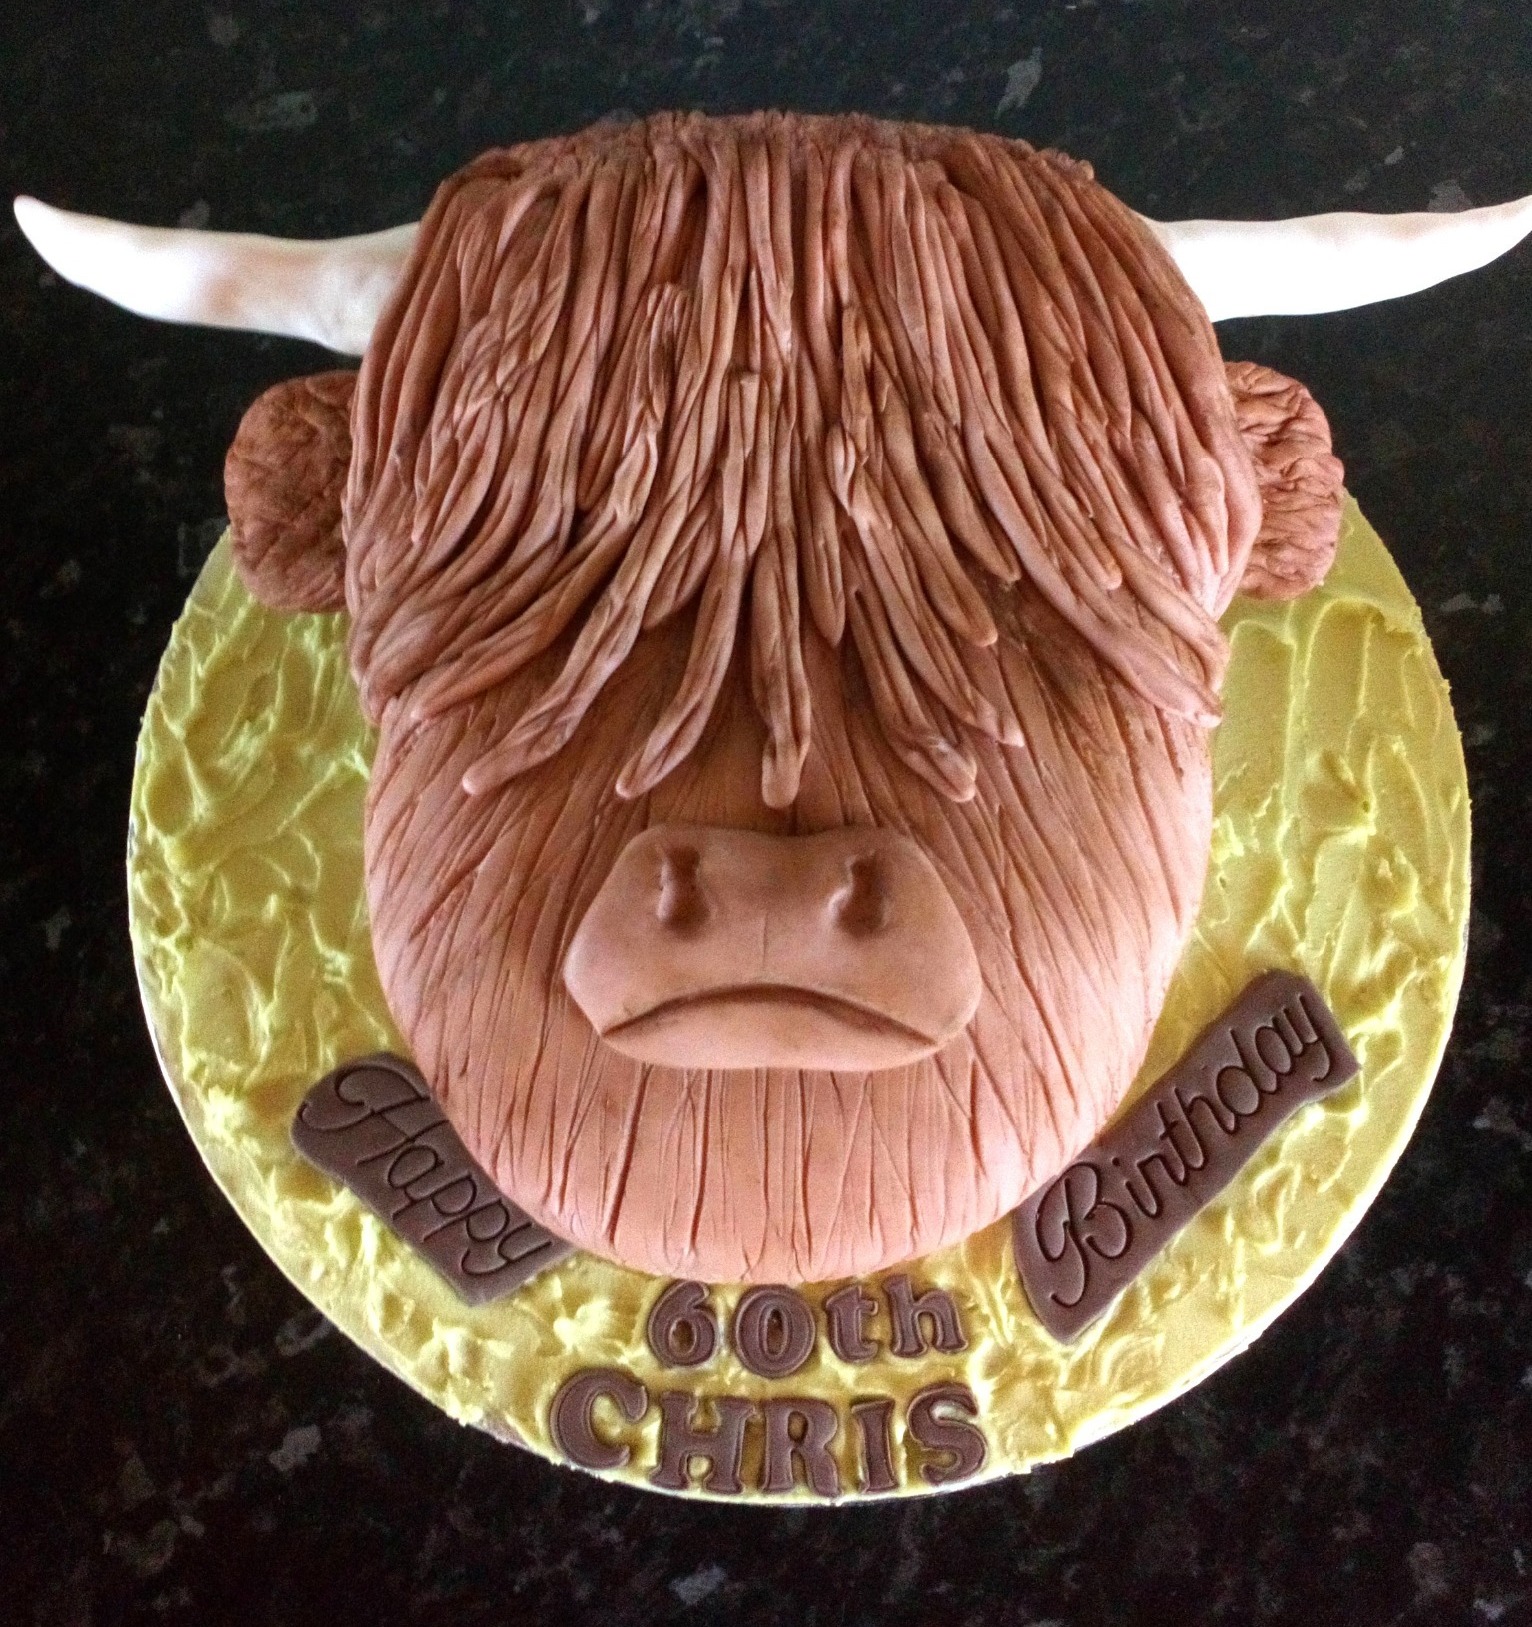 A highland cow novelty cake for a 60th birthday